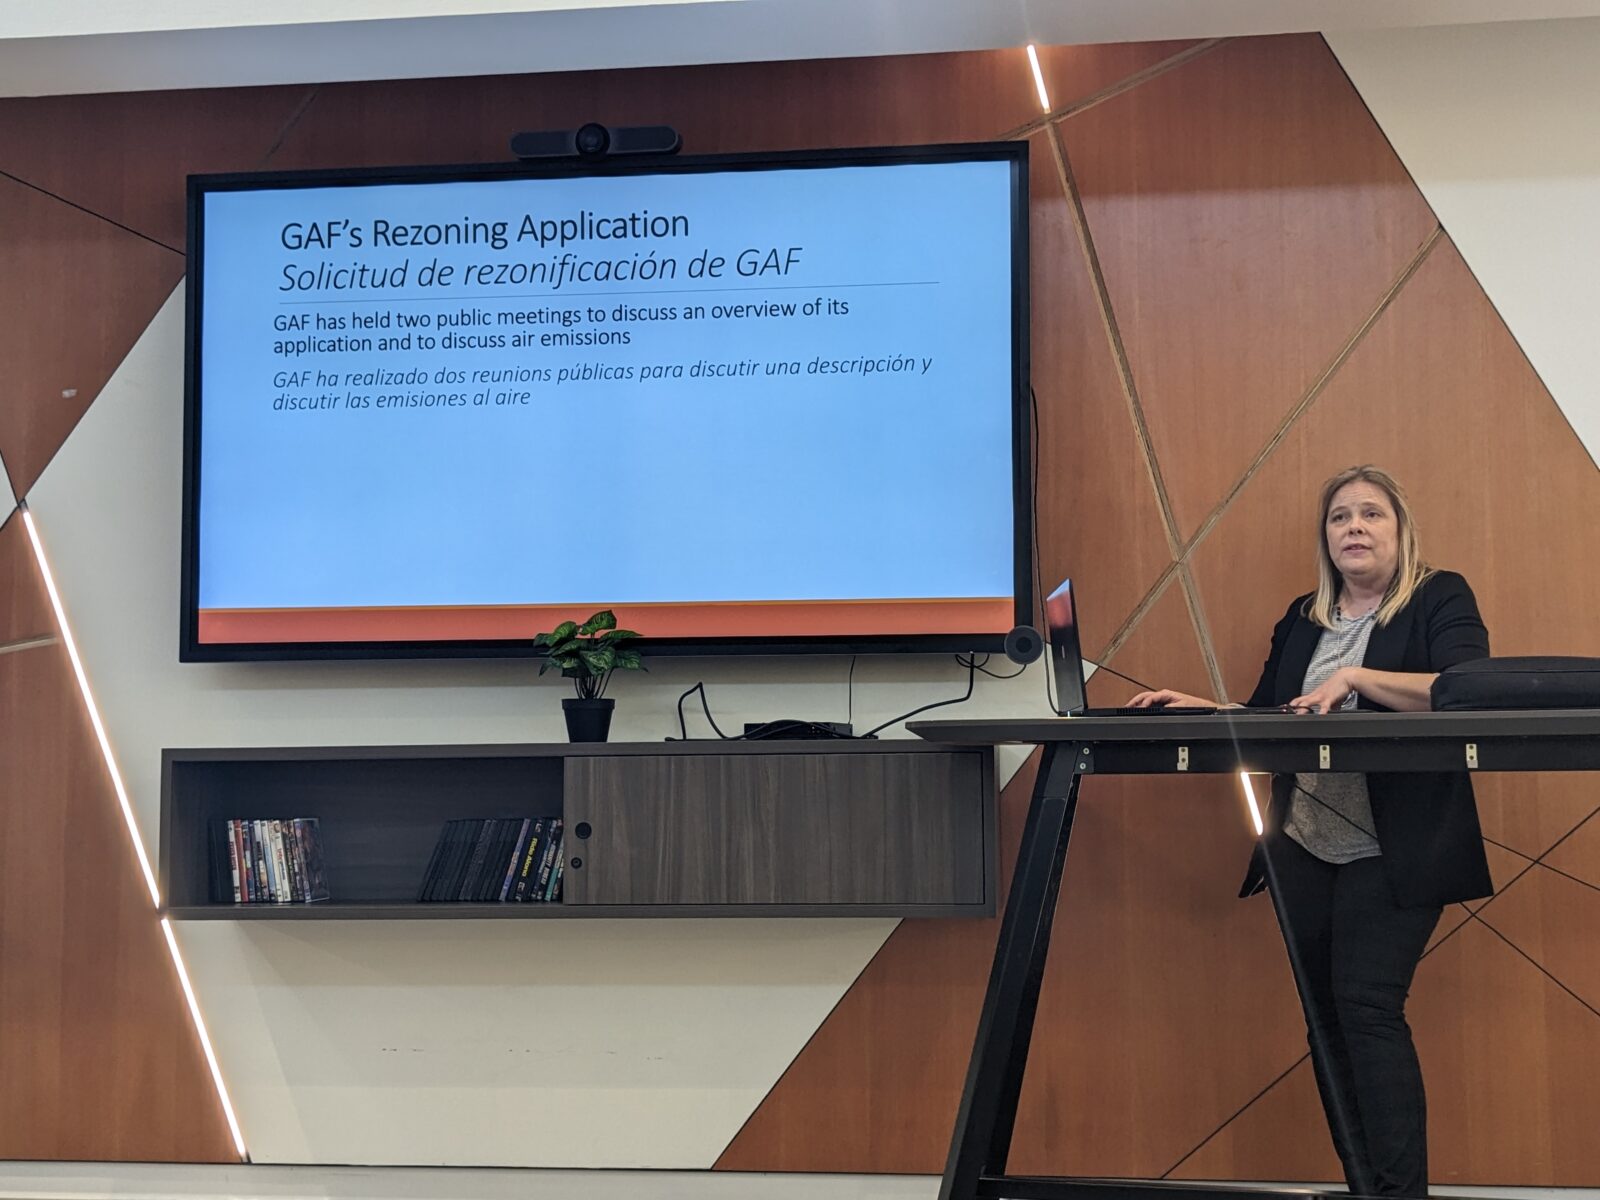 Wendi Hammond, an attorney with Legal Aid of Northwest Texas, stands next to a screen displaying a presentation about environmental justice concerns in West Dallas. The screen reads: "GAF's Rezoning Application: GAF has held two public meetings to discuss an overview of its application and to discuss air emissions."